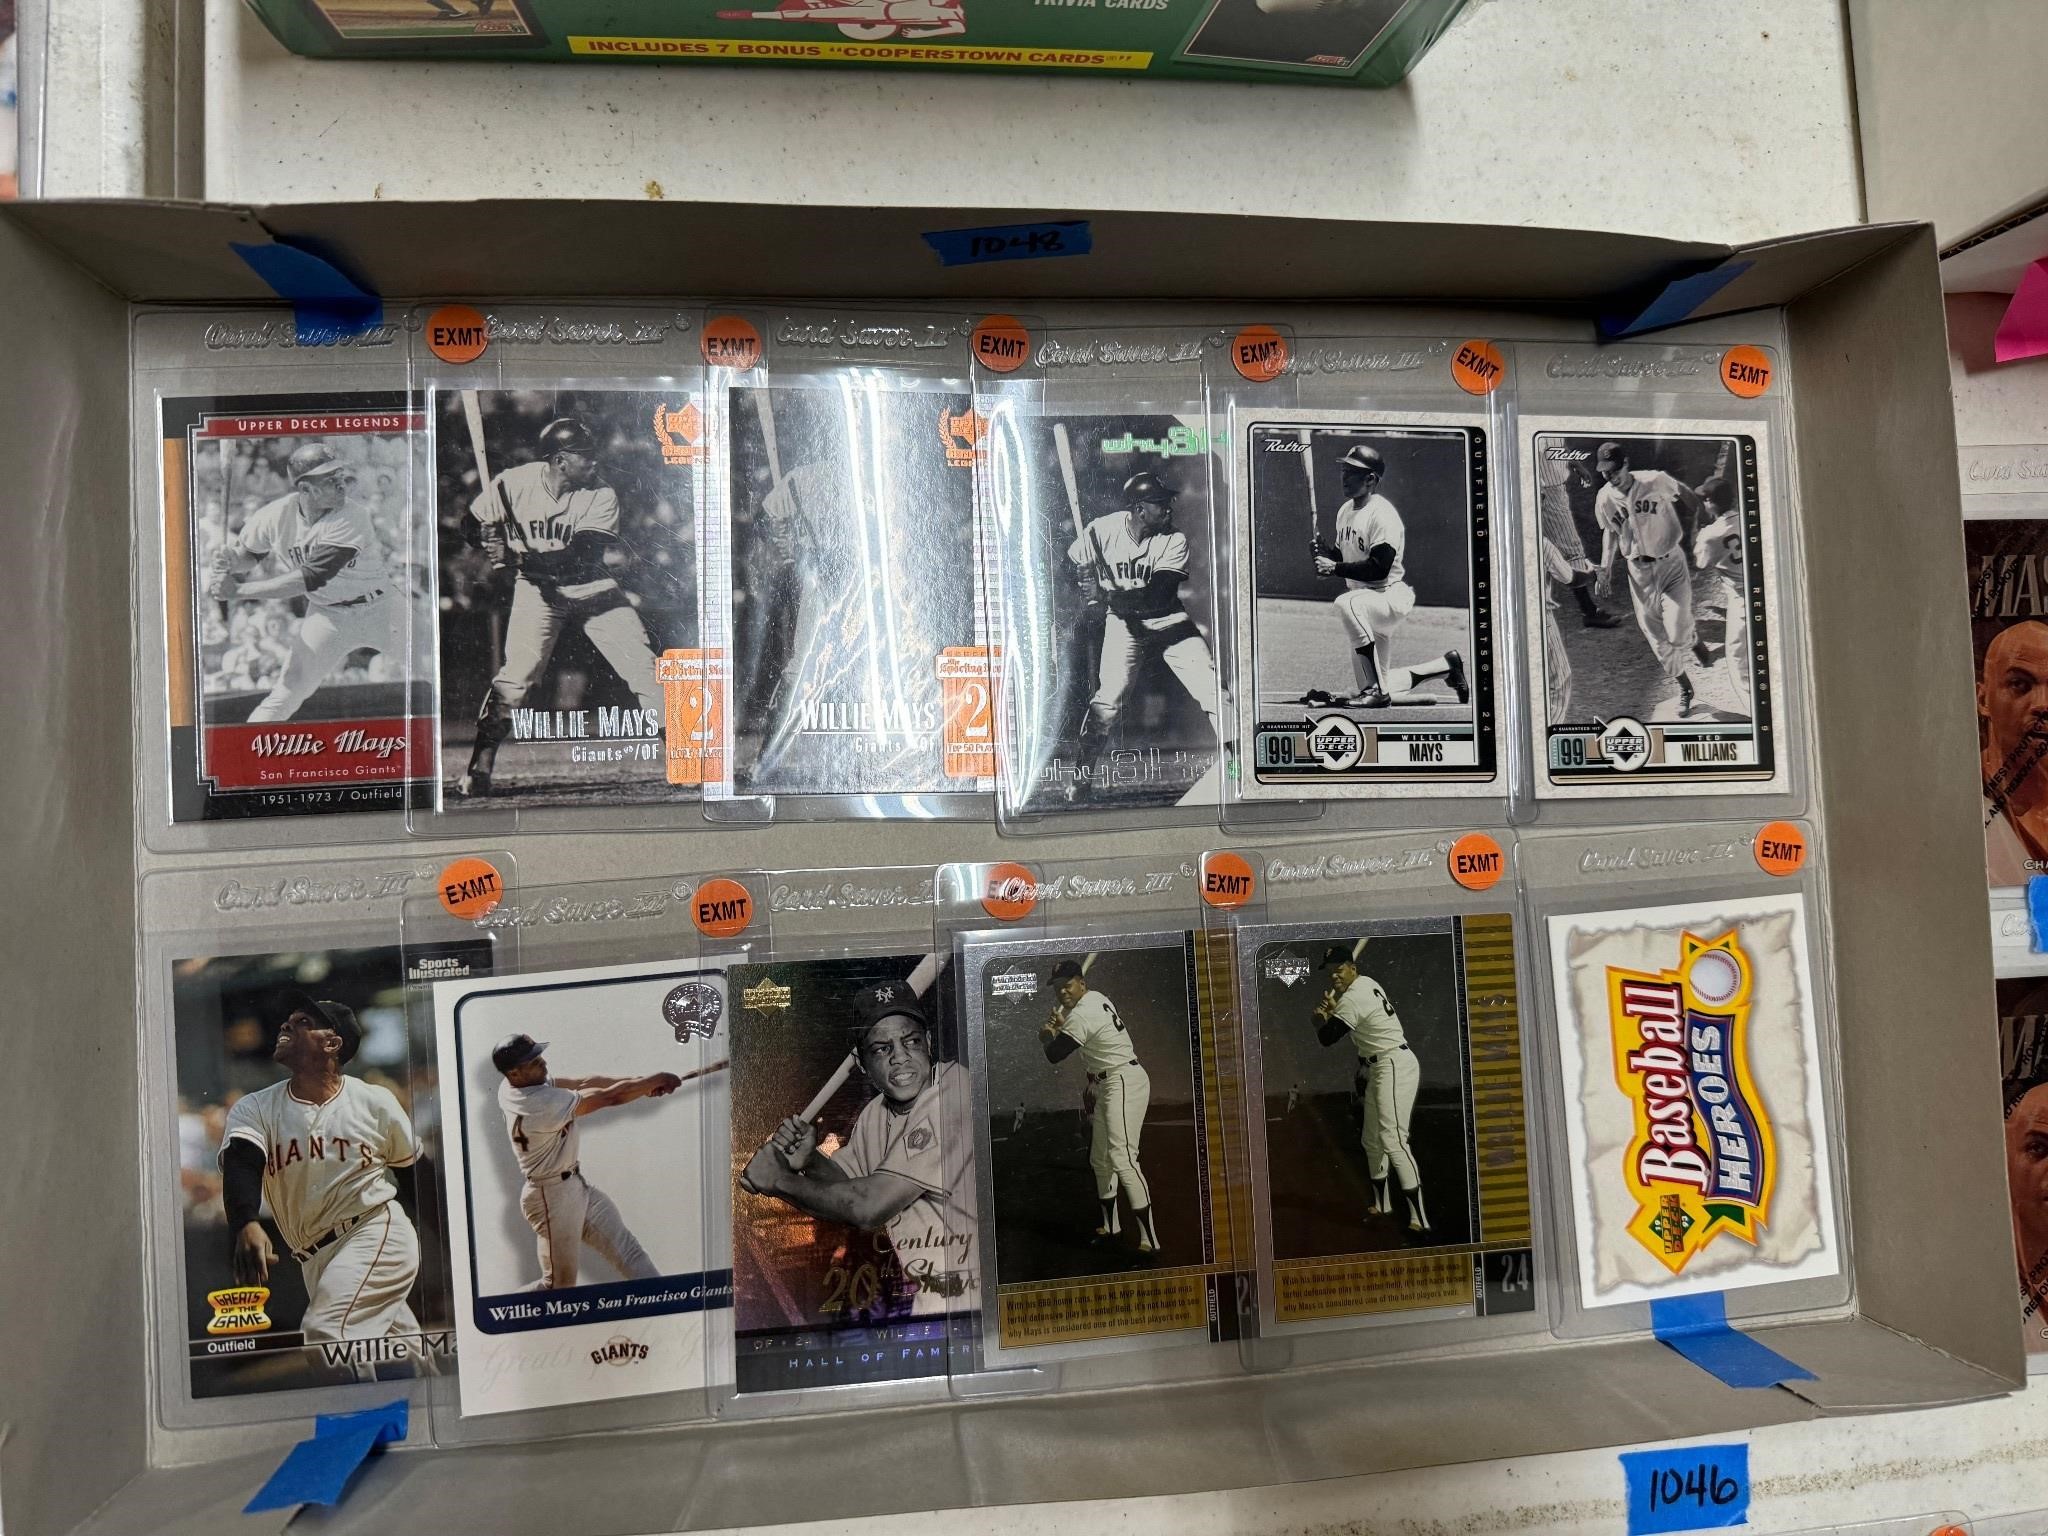 (12) Willie Mays Cards - EXMT